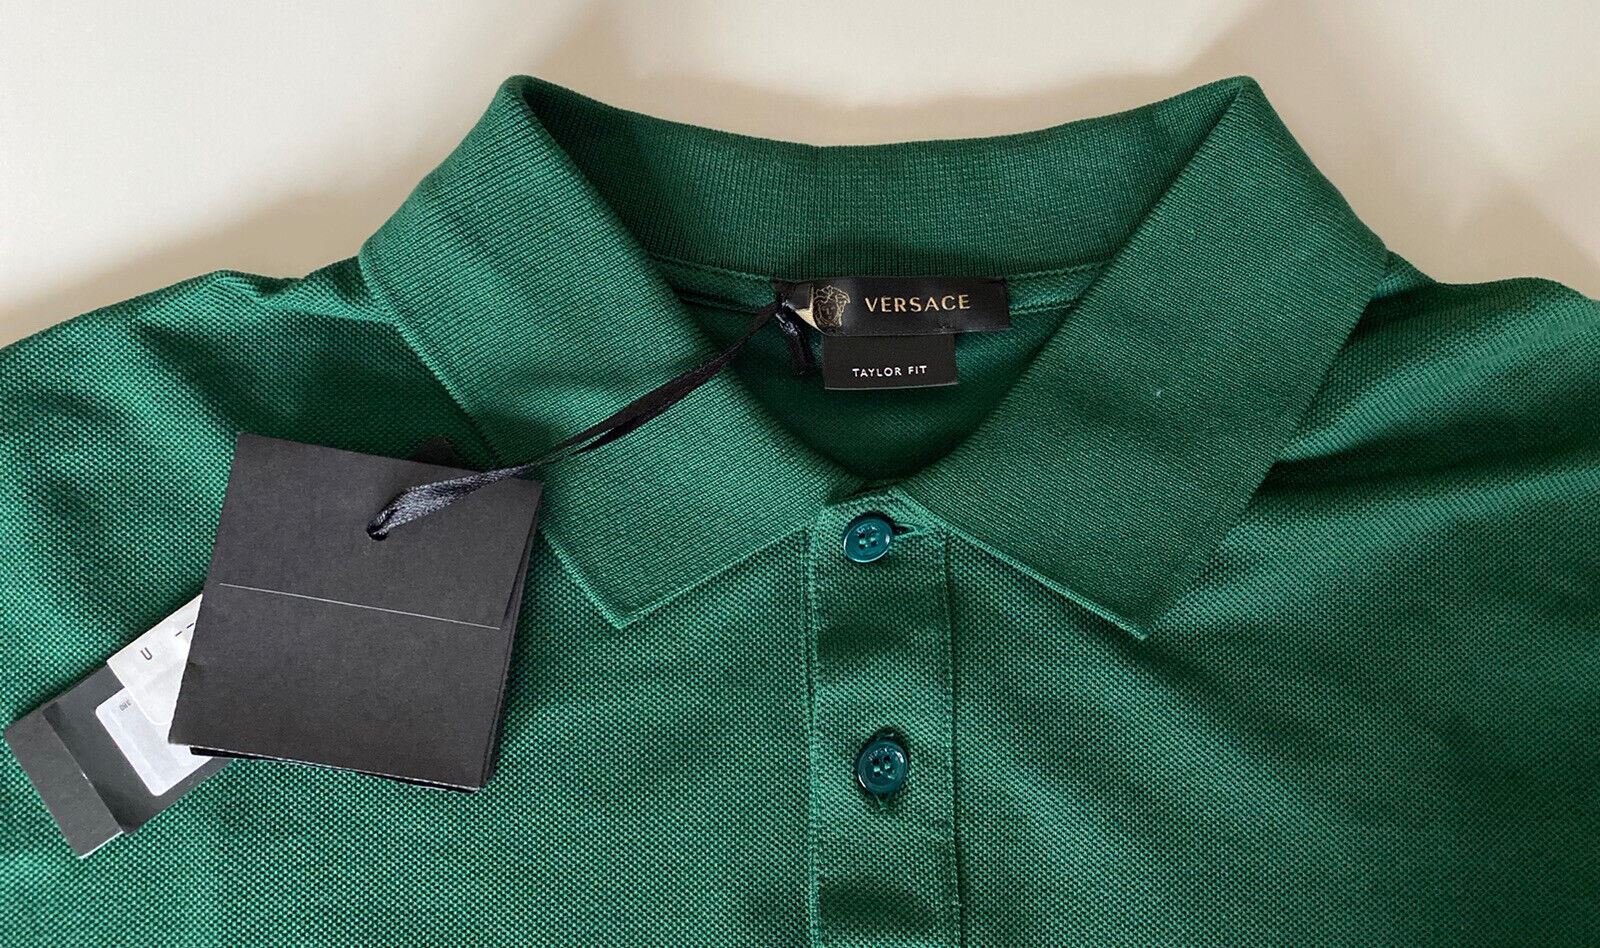 NWT $650 Versace Blue Striped Tailor Fit Cotton Polo Shirt 2XL A84992 Italy